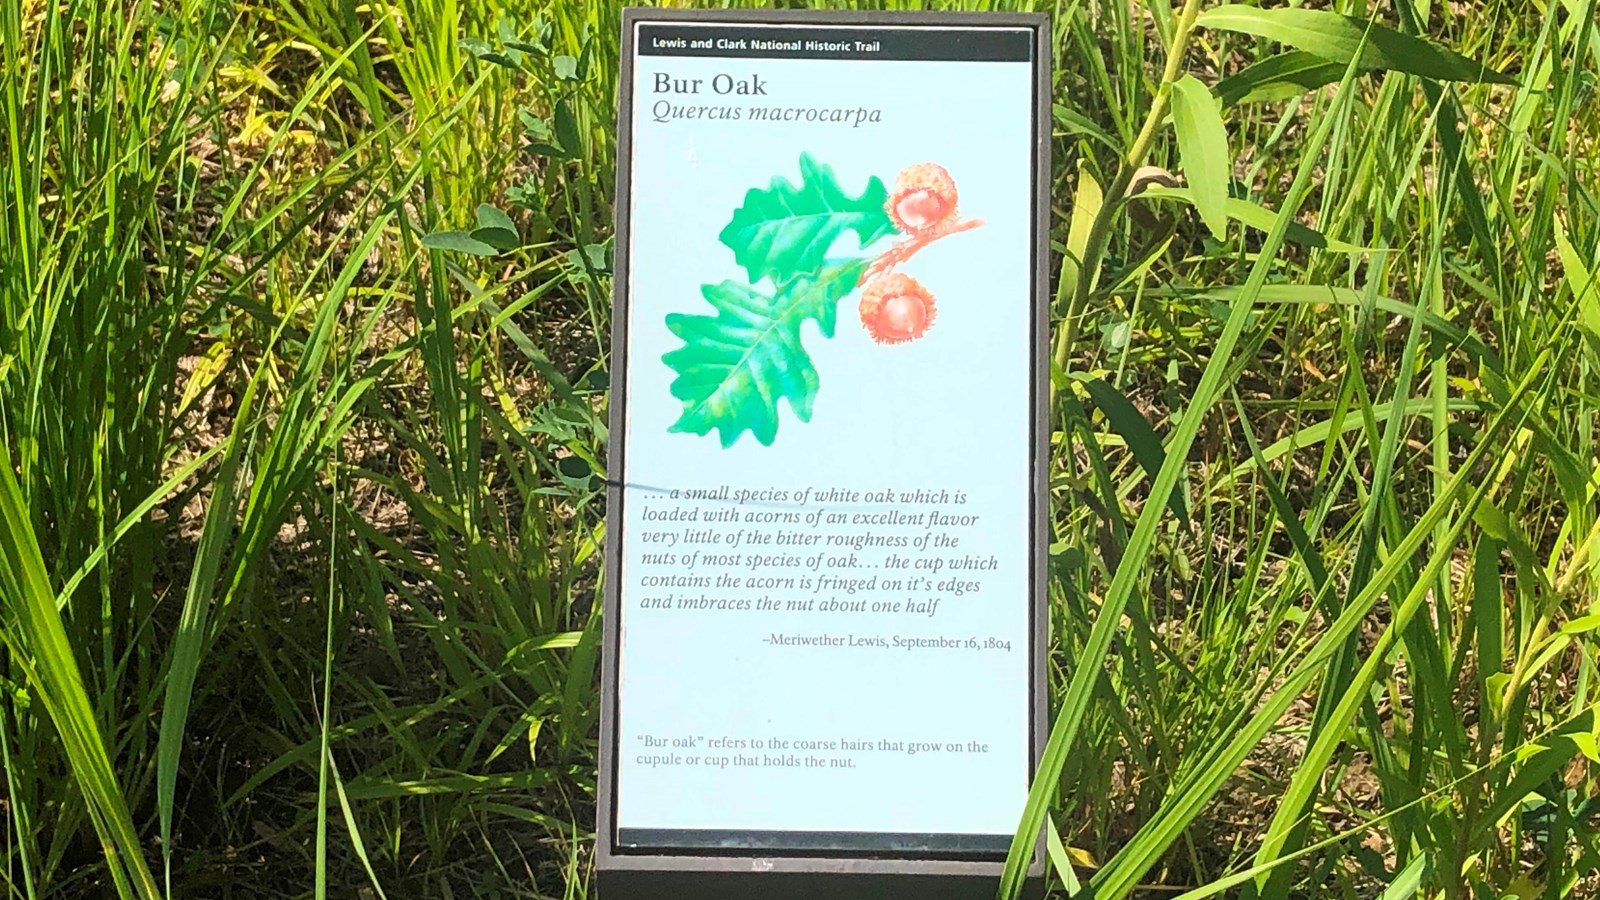 A small sign is placed near a green plant. The sign describes the Bur Oak.